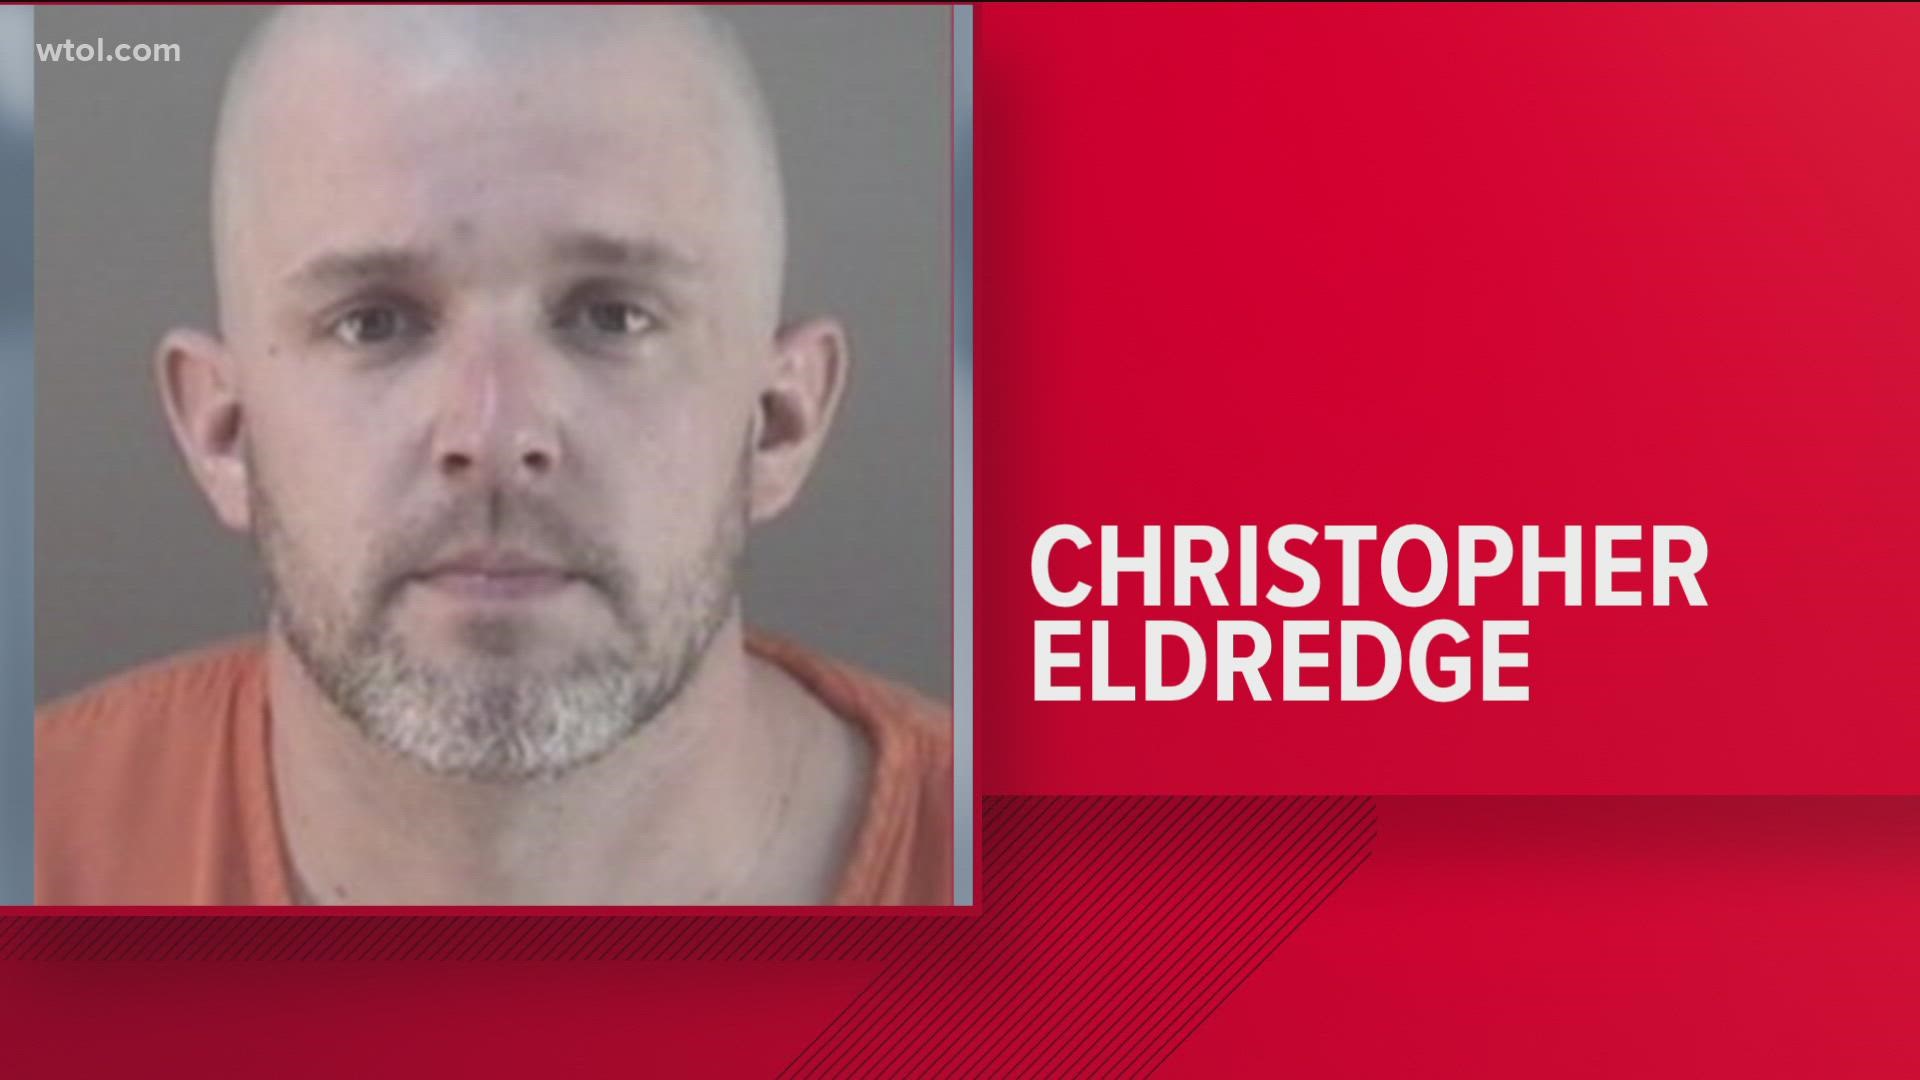 On Thursday, a Wood County Grand Jury indicted Christopher Eldredge, who escaped from custody nearly two weeks ago.